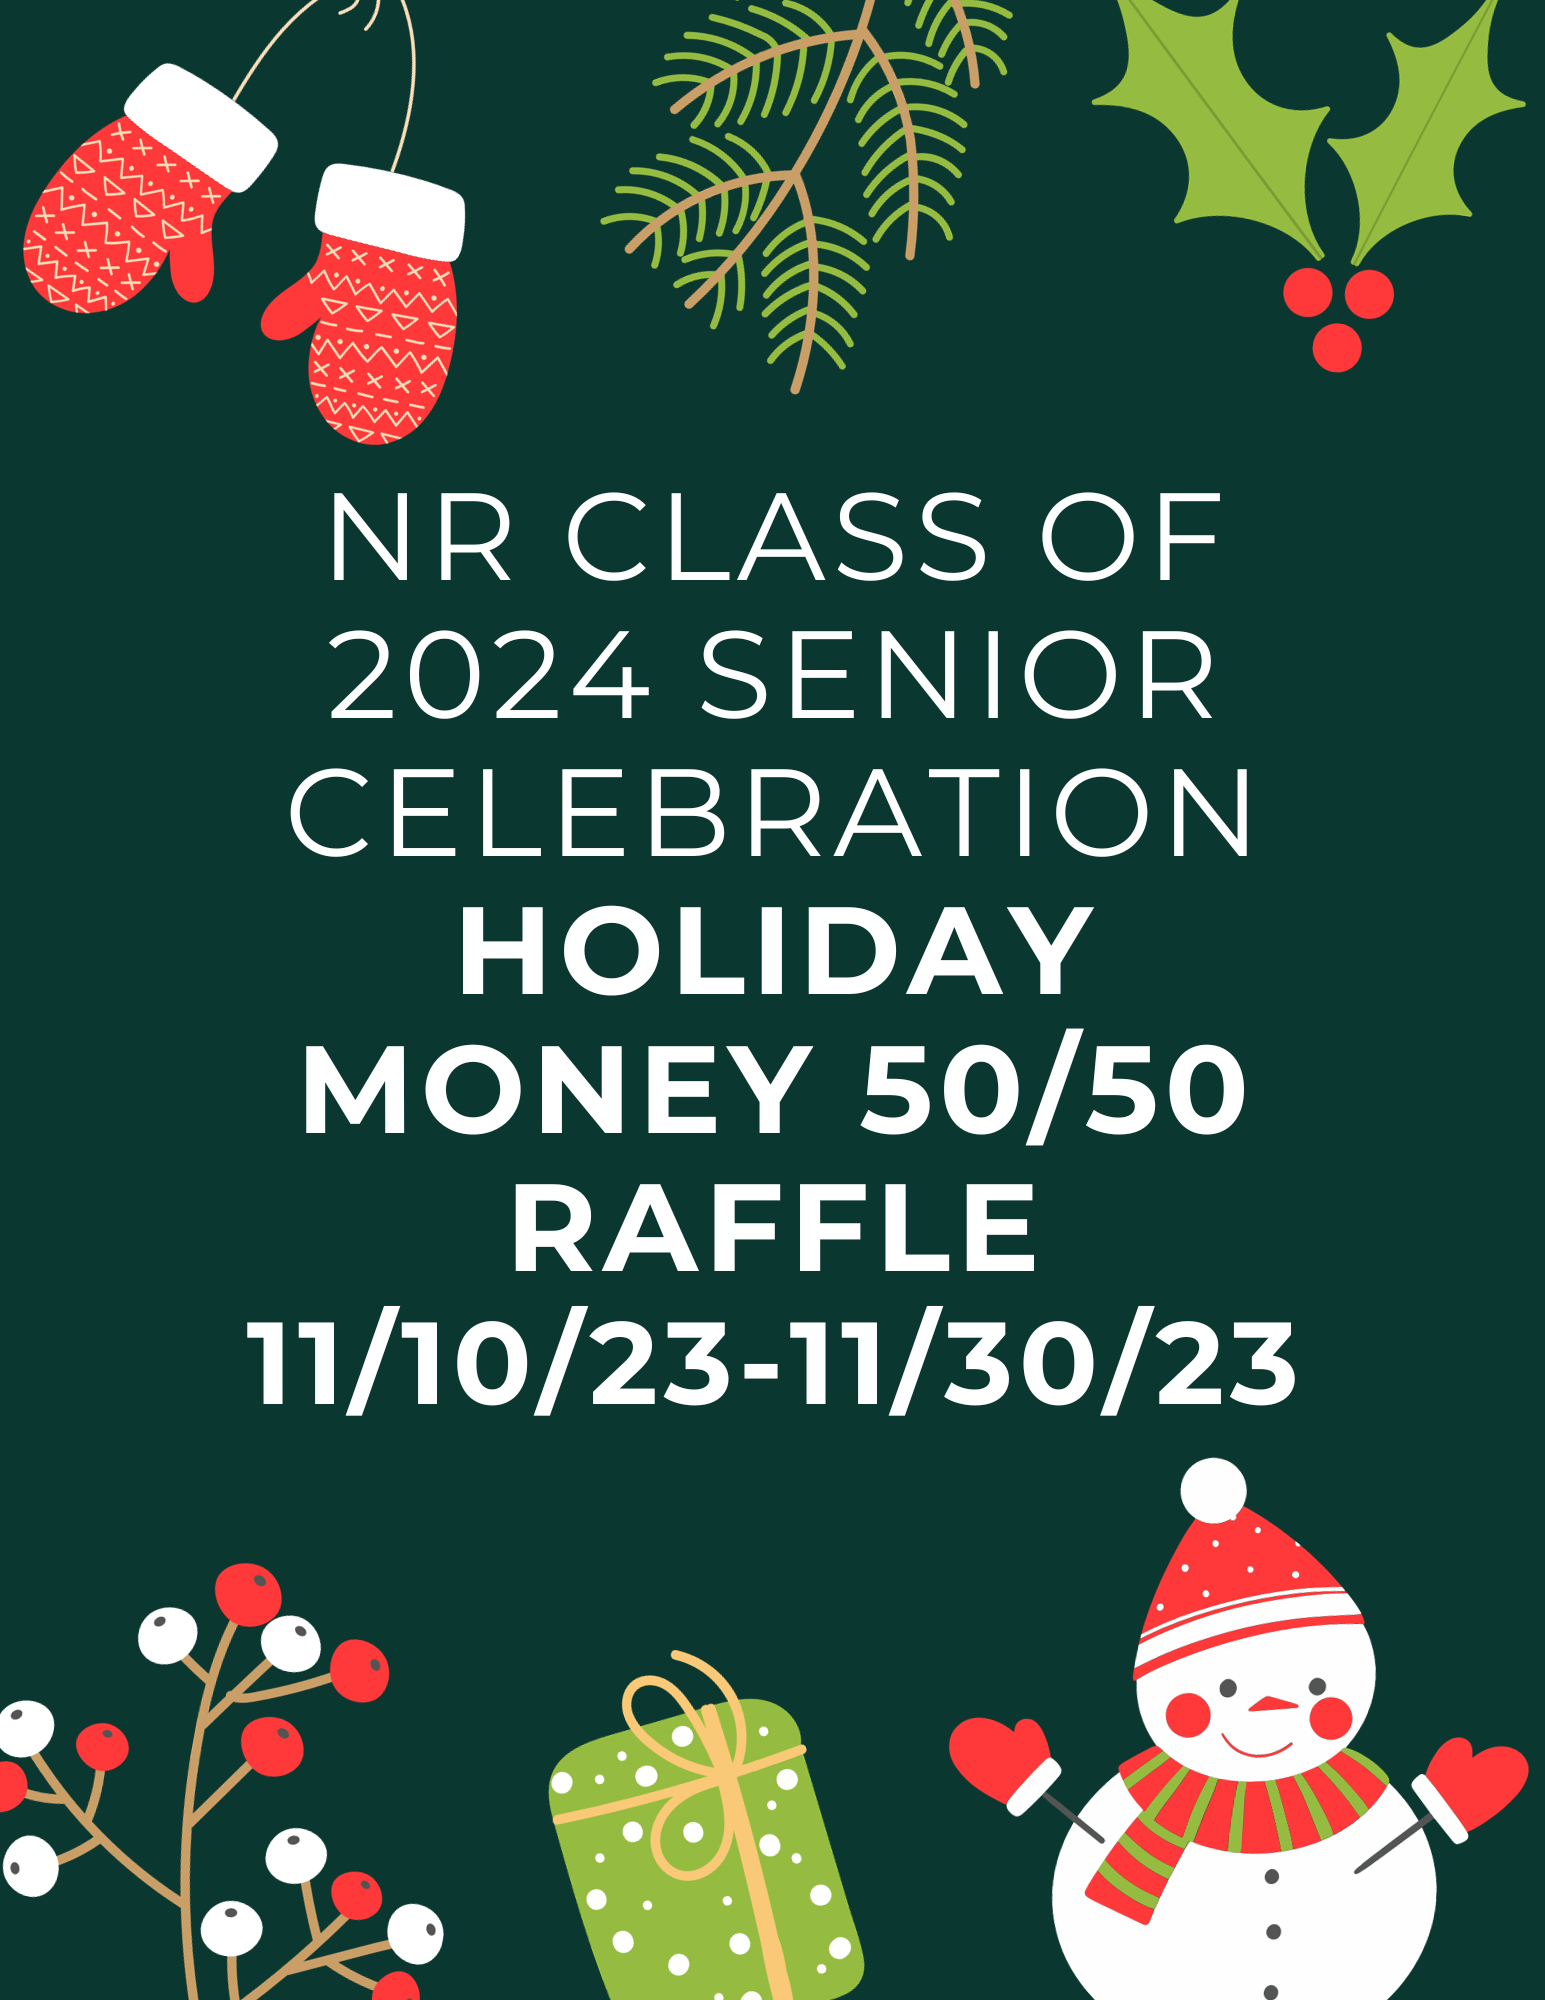 Holiday Money 50/50 Raffle to Support the NR Class of 2024 Senior Celebration | NRHS Ranger Parent Club